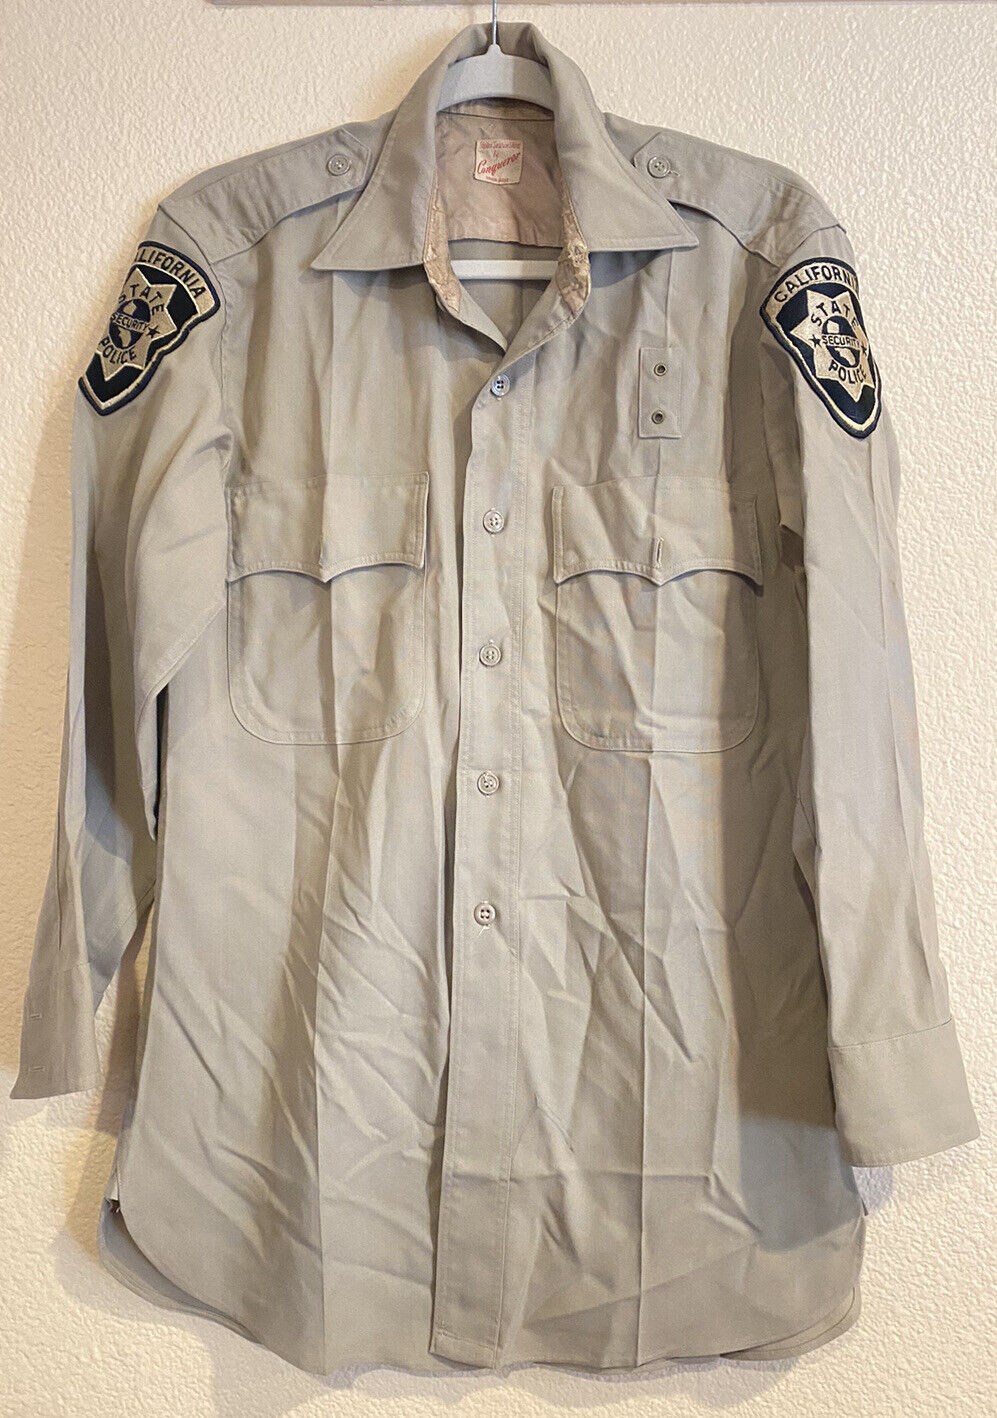 Vintage California State Security Police Long Sleeve Shirt Size 16